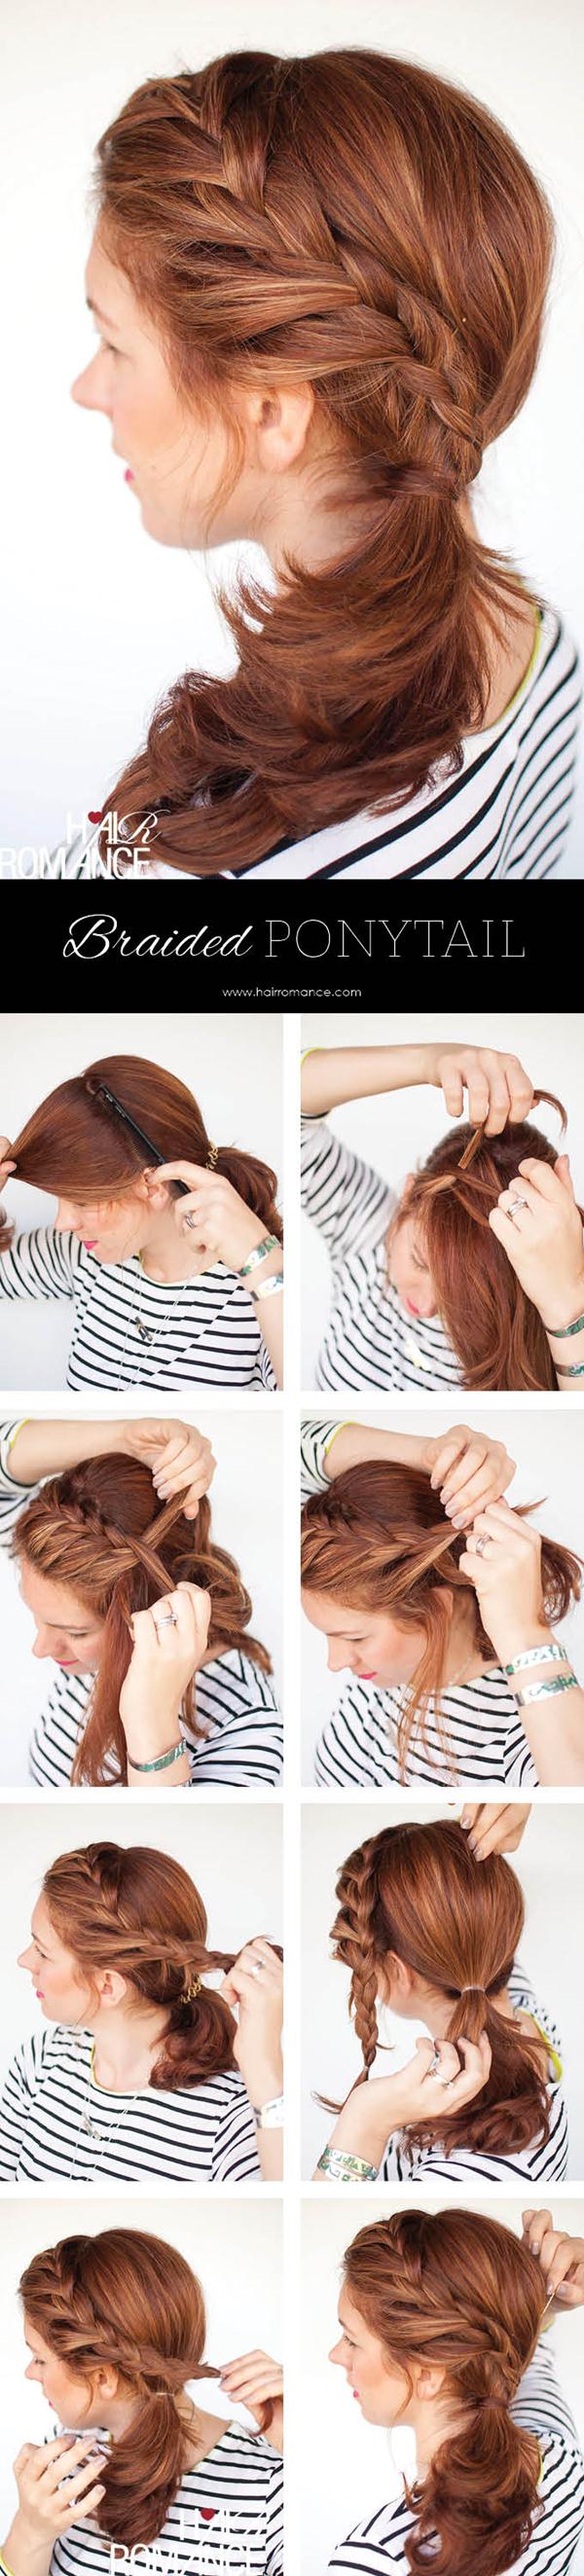 Hair-Romance-braided-side-ponytail-hairstyle-tutorial